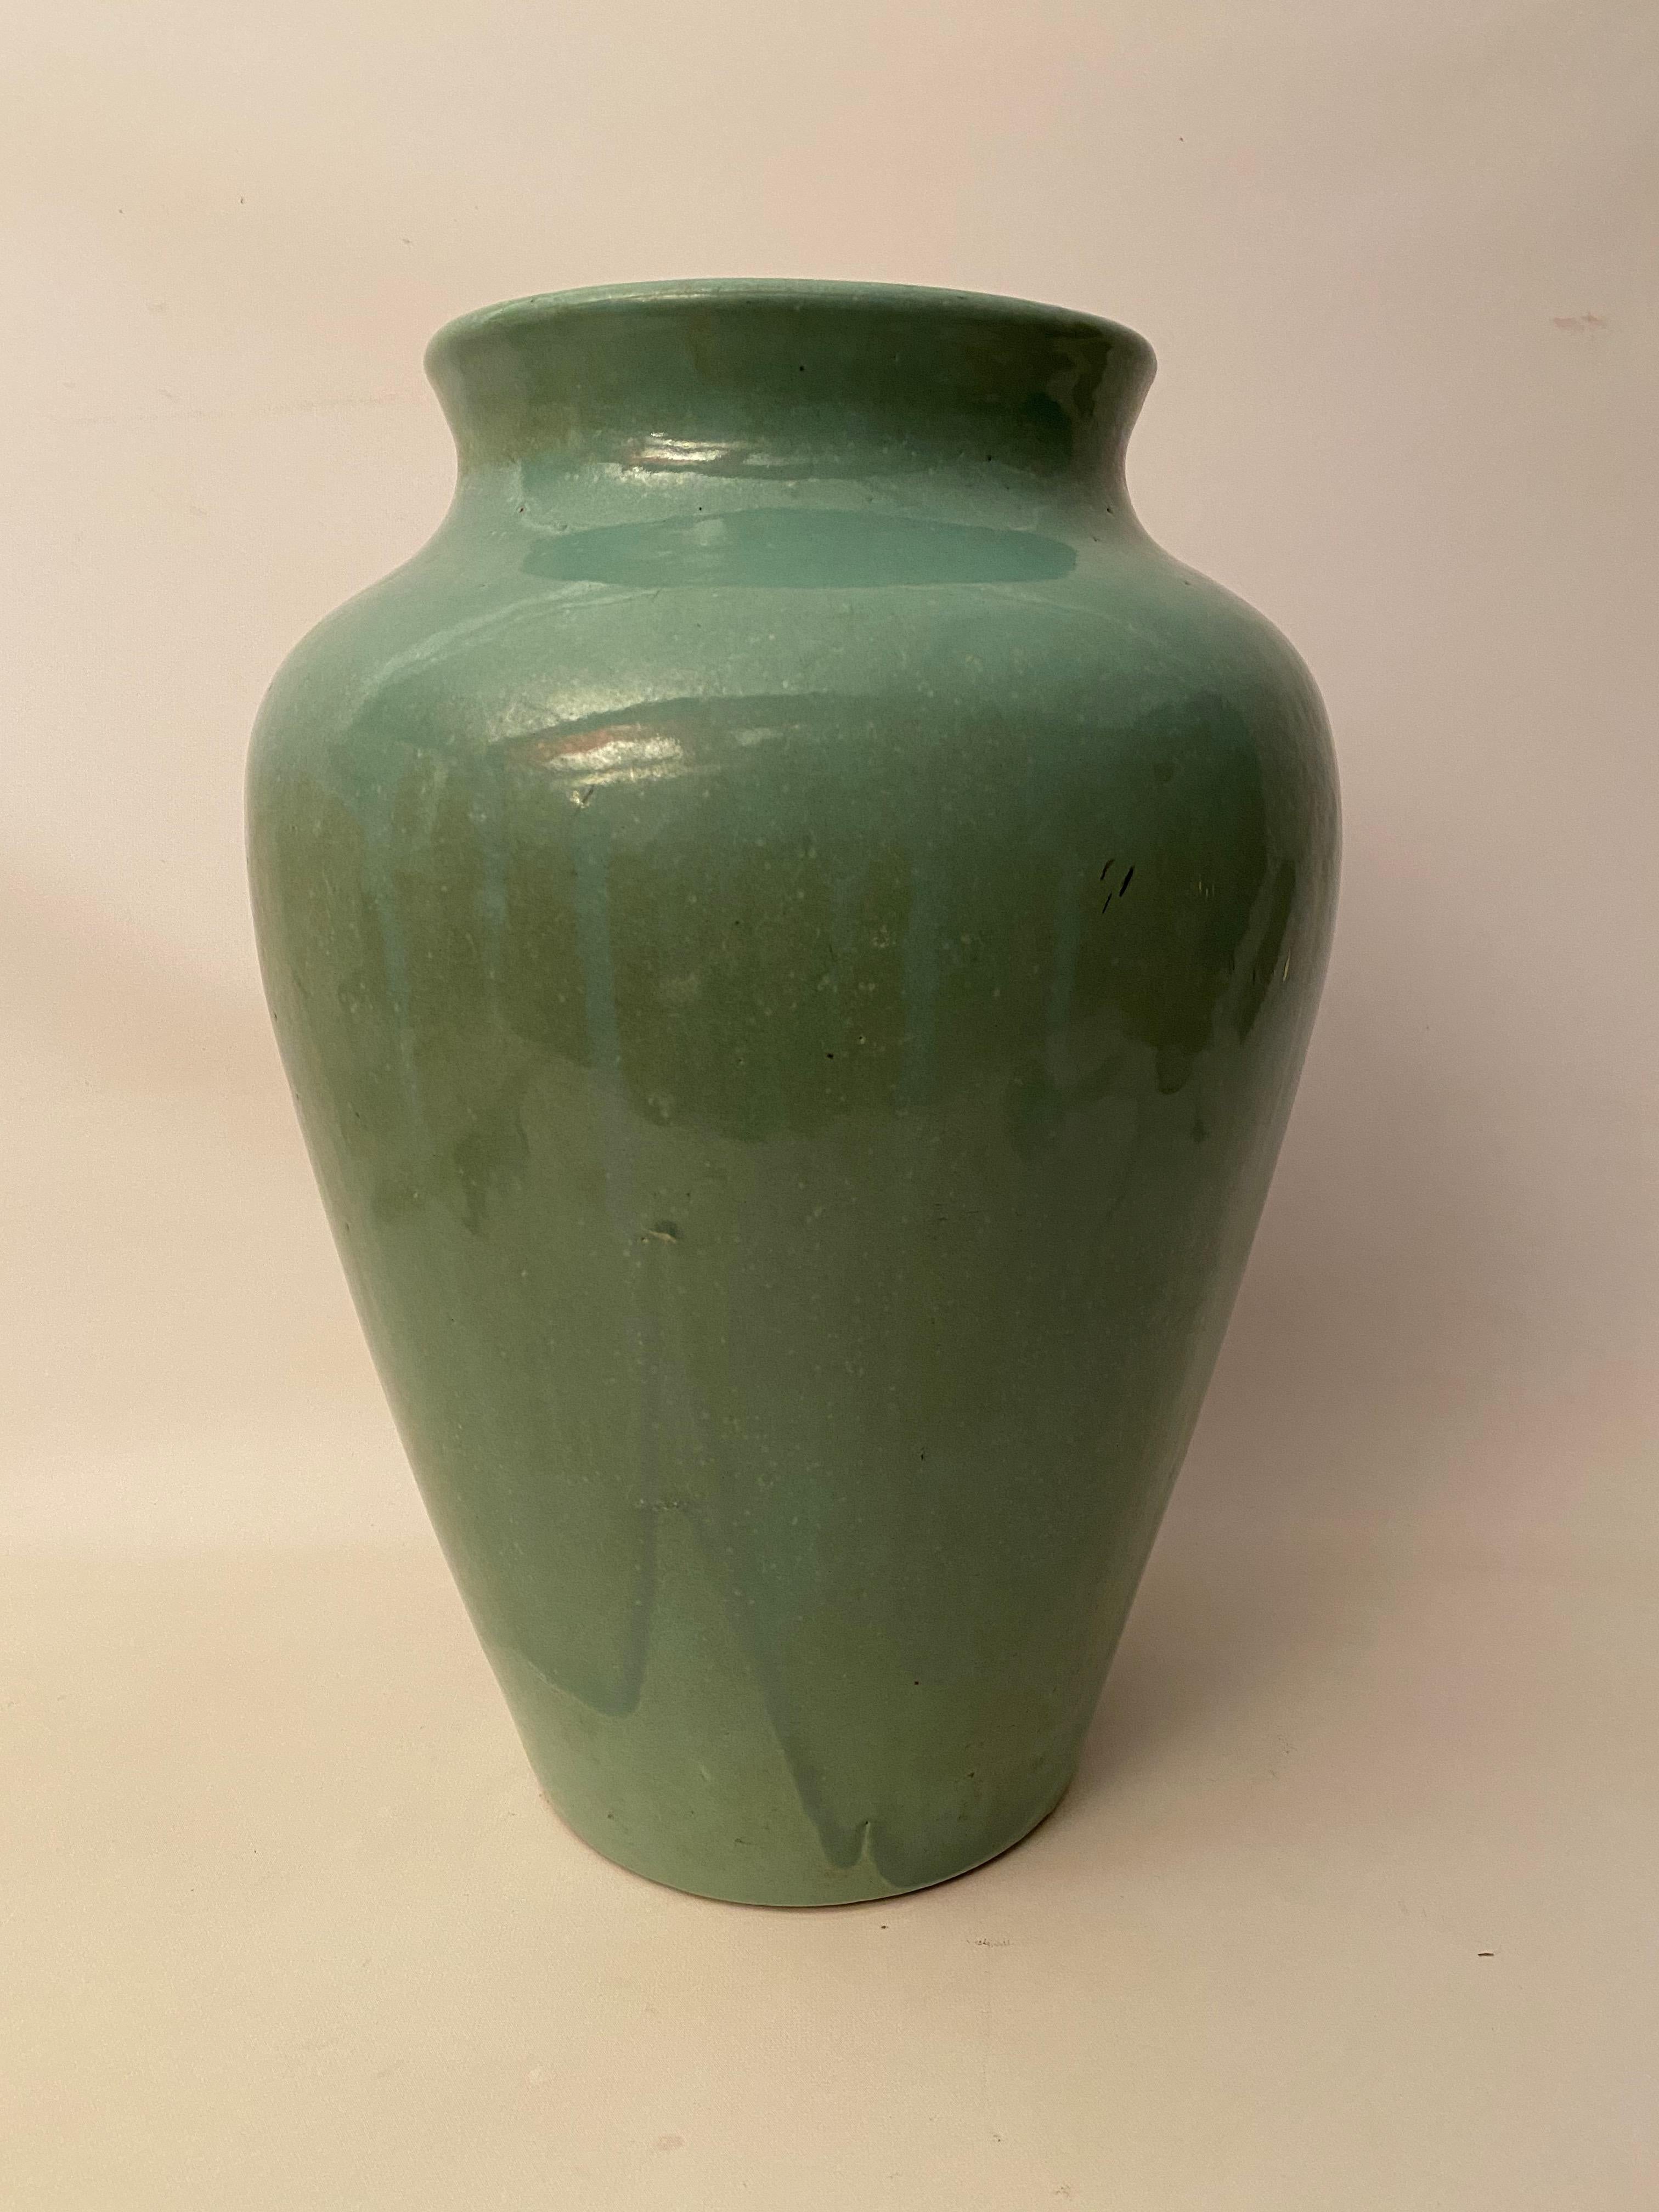 Large blue on blue drip glaze stoneware amphora oil jar for Zanesville, Ohio Stoneware Company, circa 1930. The pot still retains a partial label (see photo). Very good condition with no visible cracks, hairlines, crazing or restorations. There is